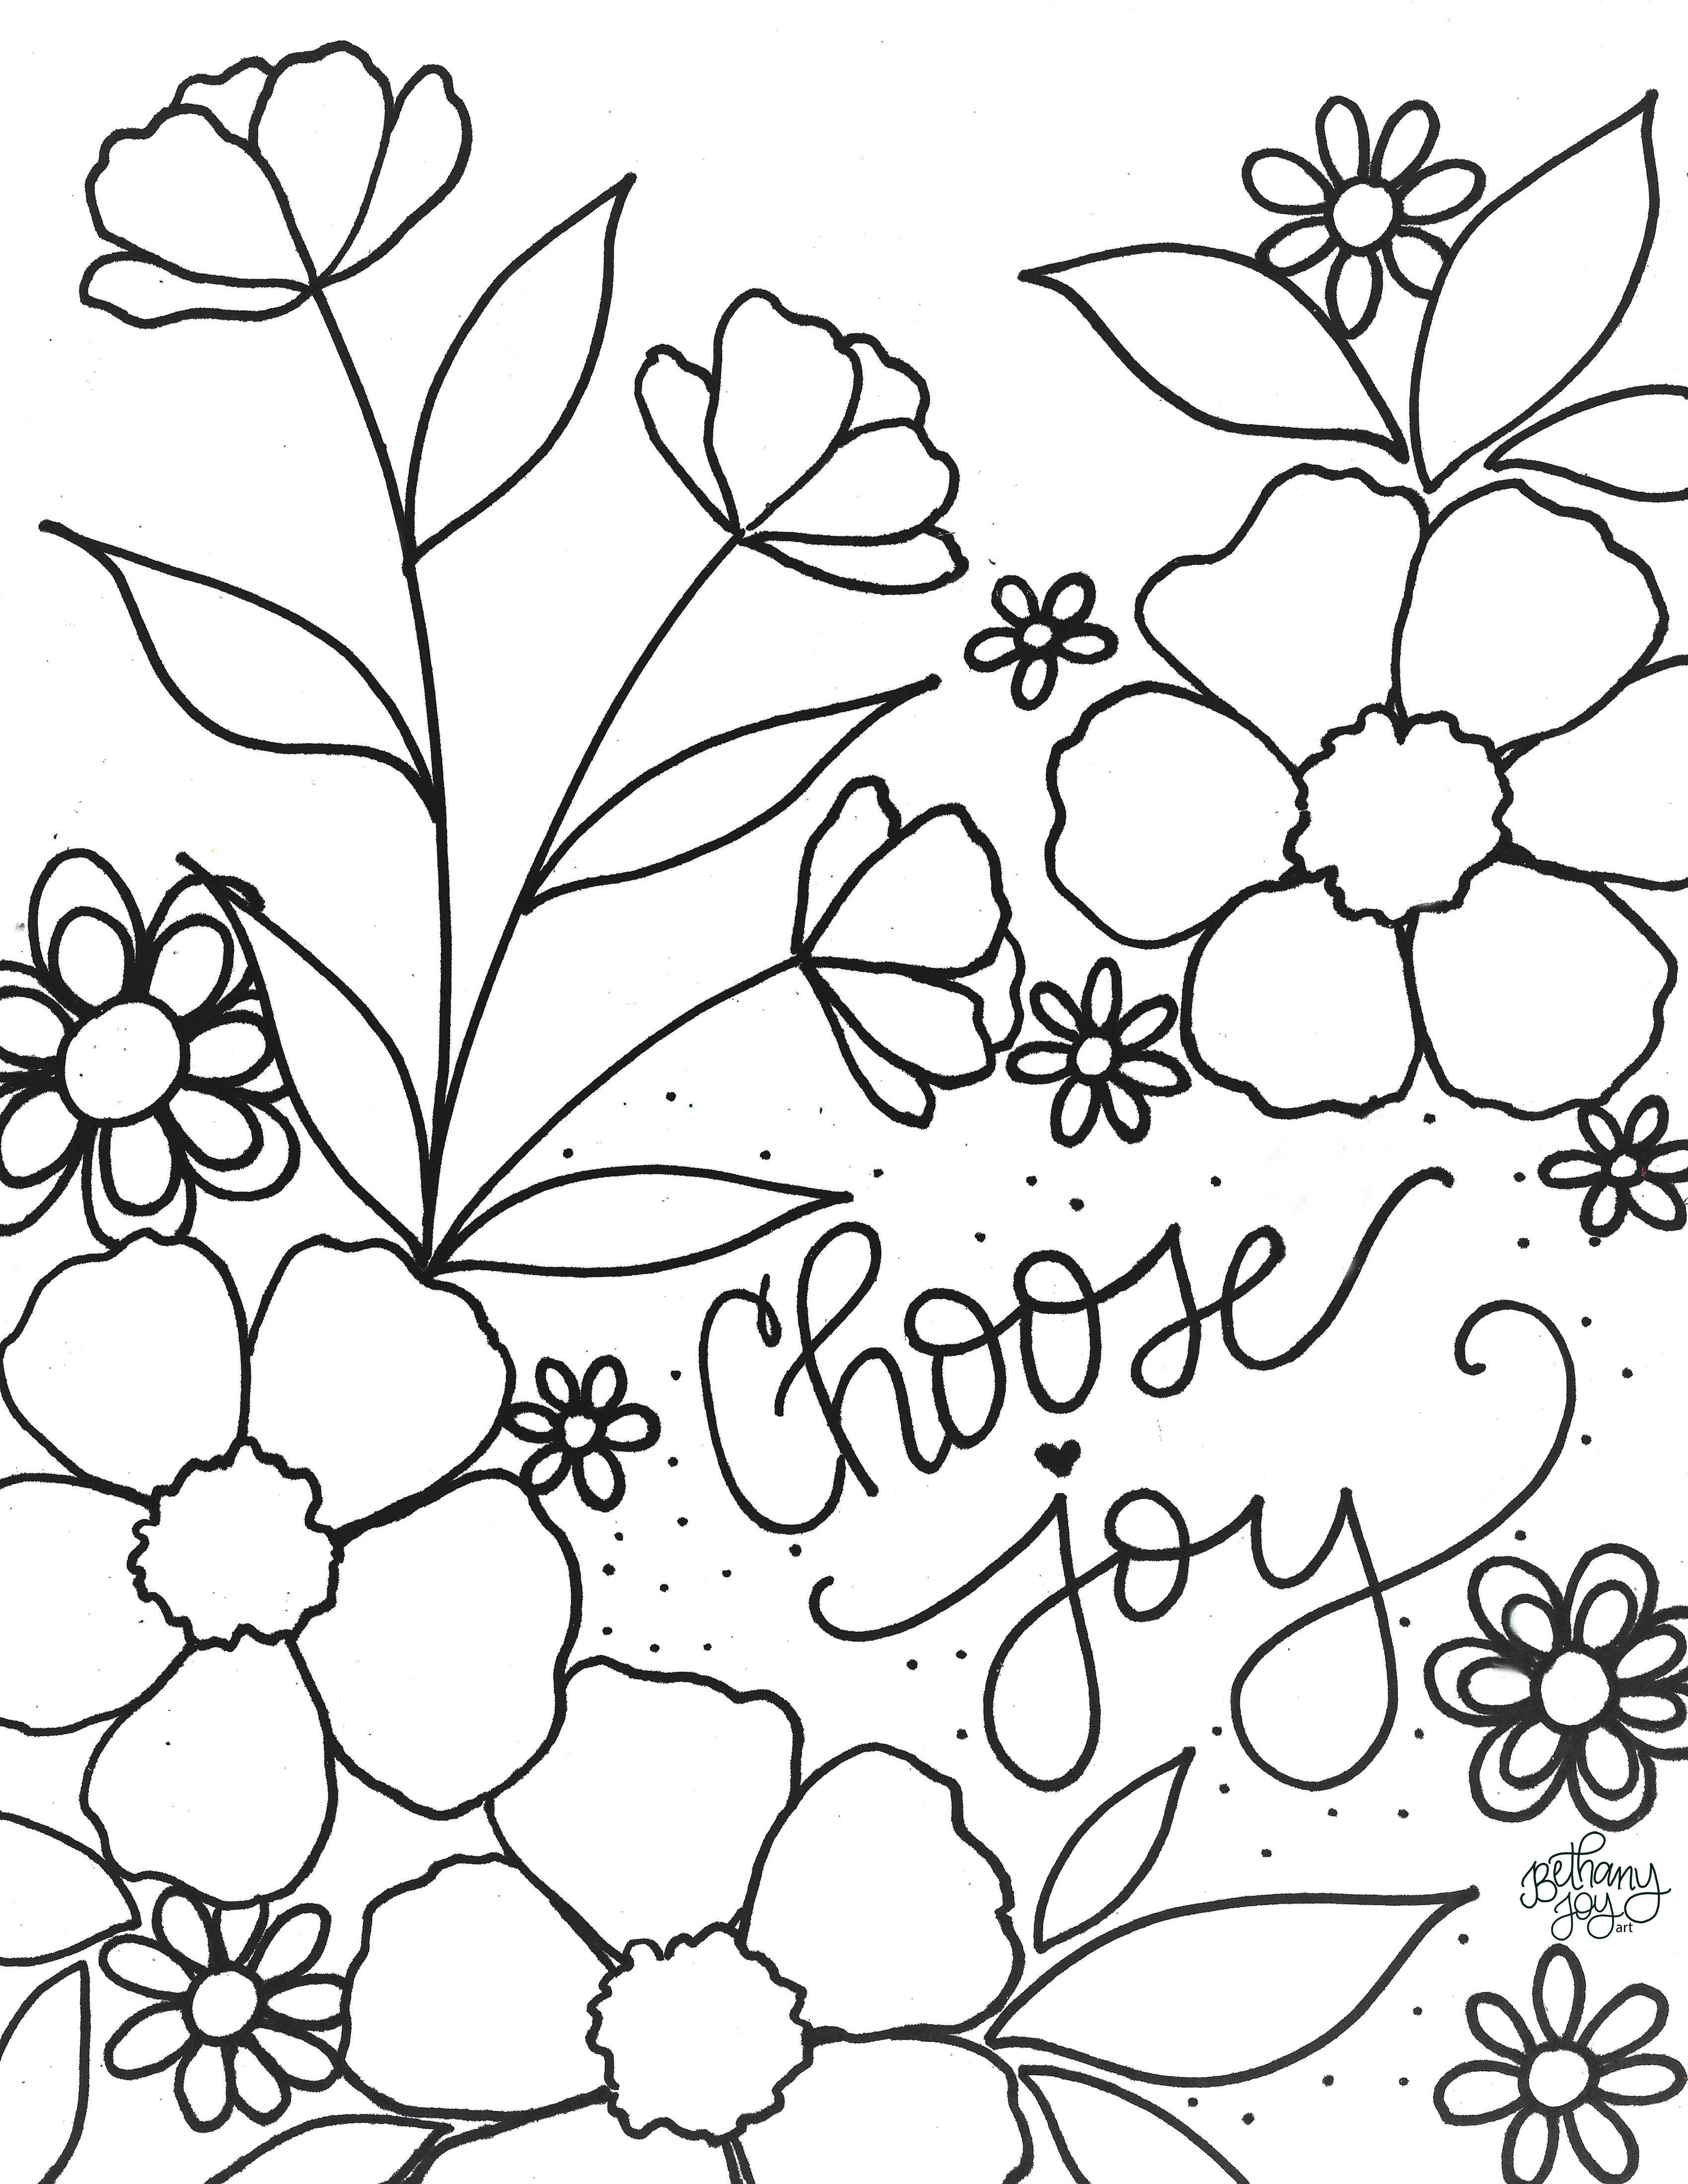 Sharing Coloring Pages